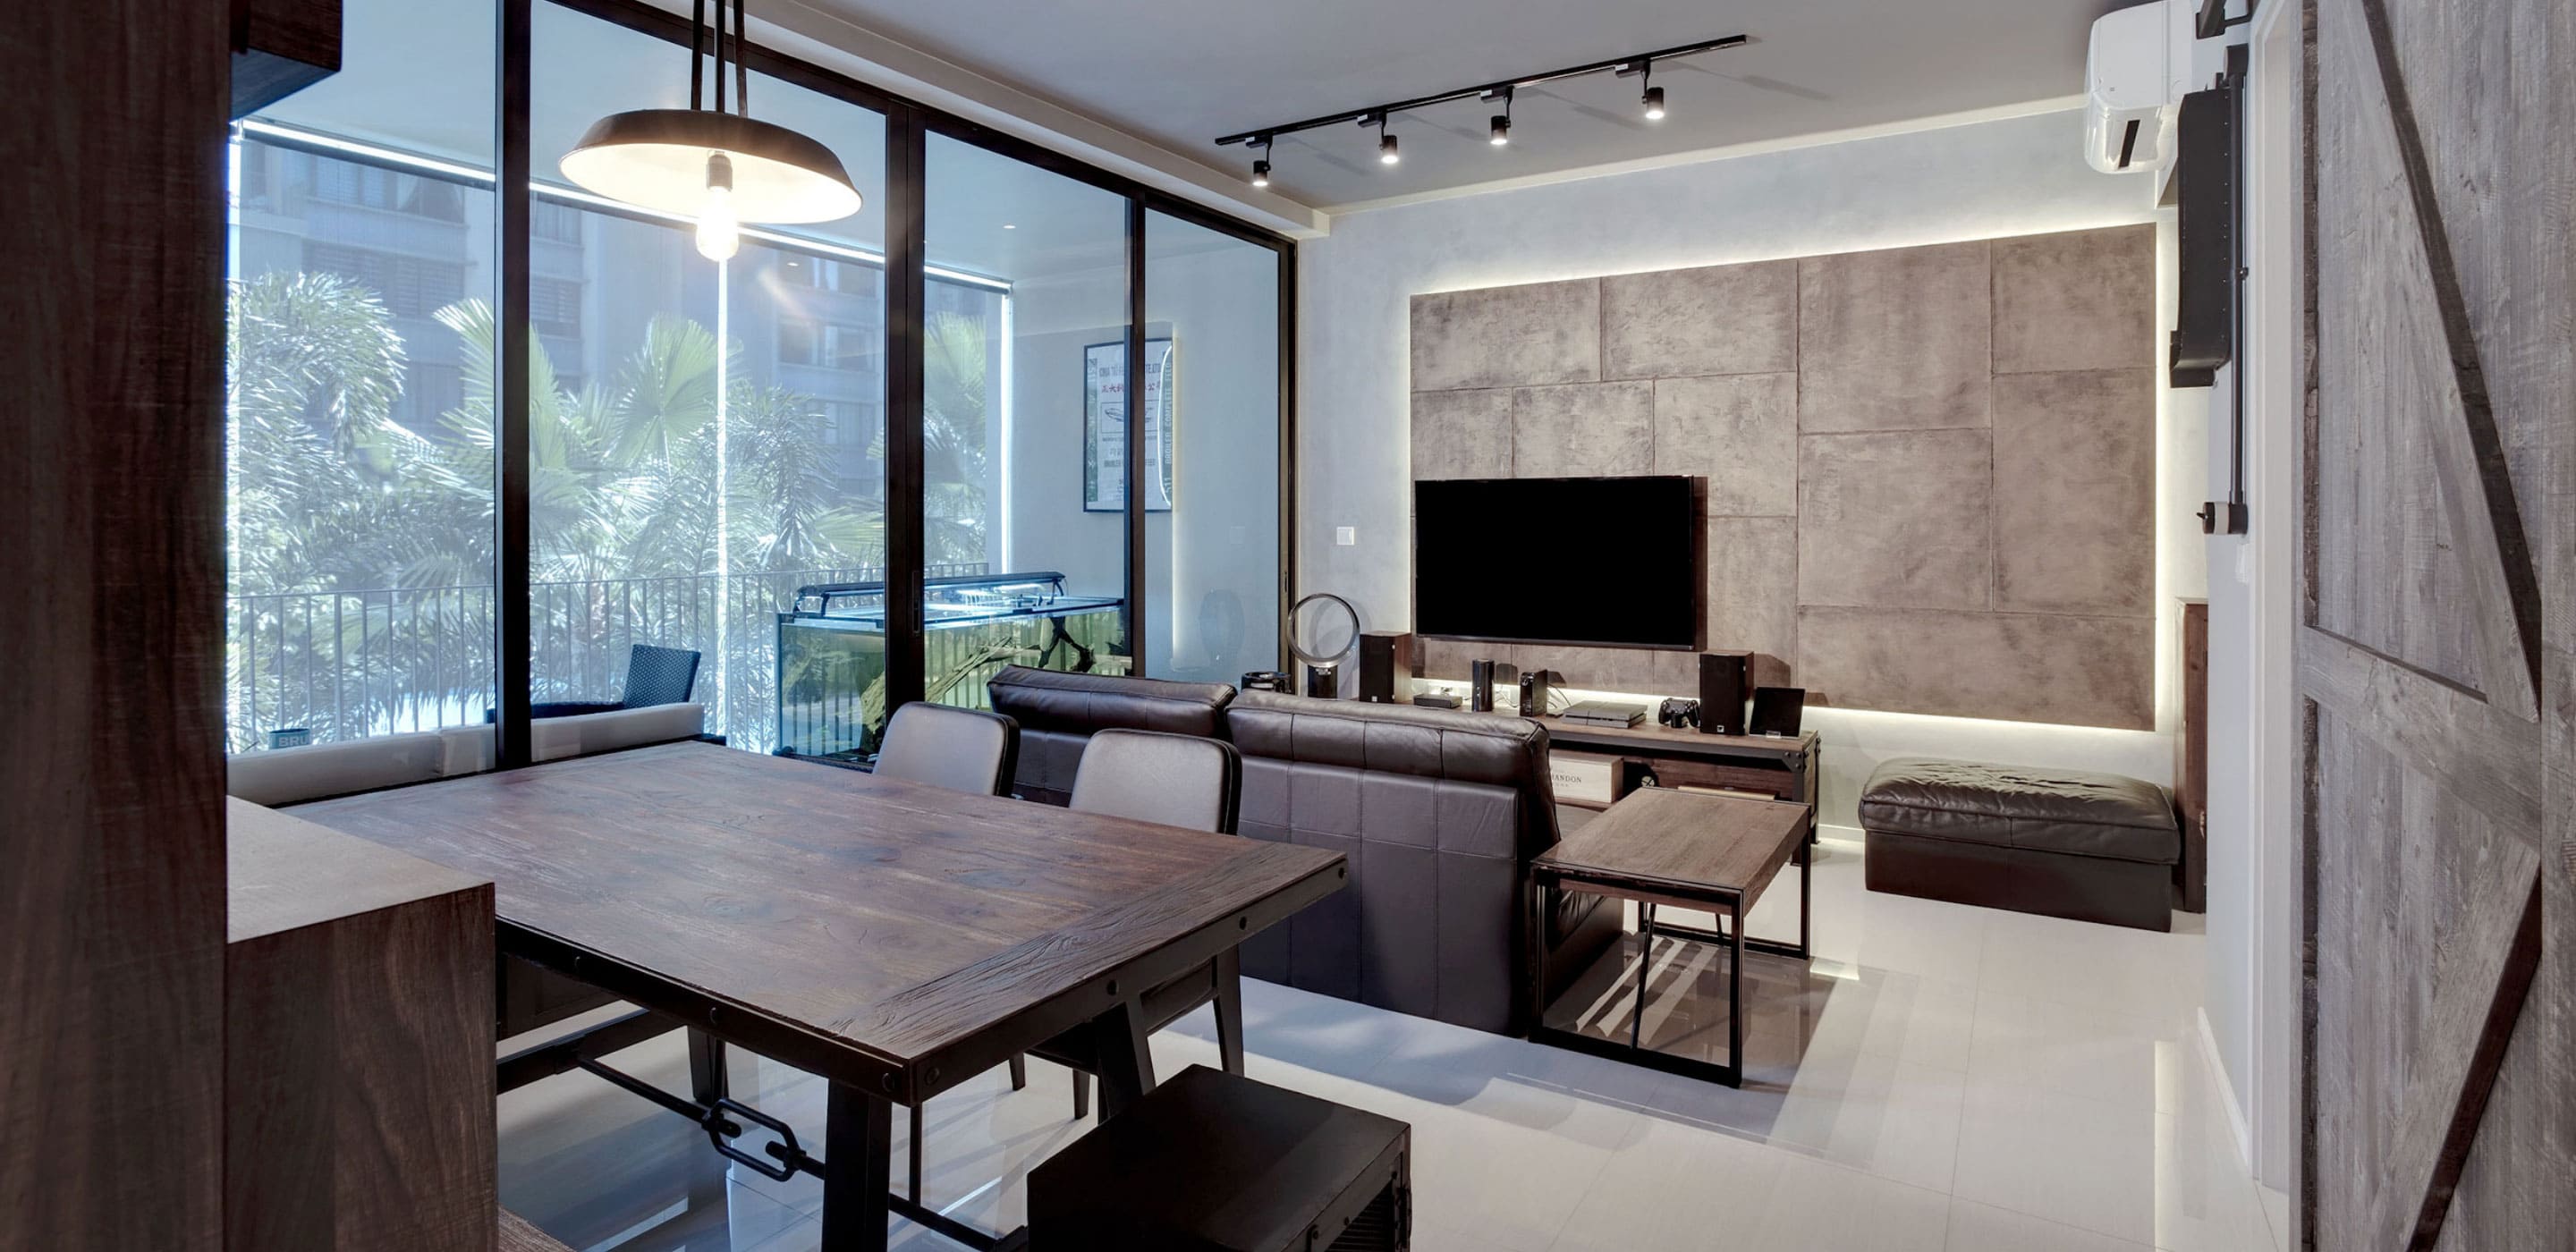 57A Edgeplains - 990sqft by Juz Interior Pte Ltd. Unit is Condo and follows a Industrial style.